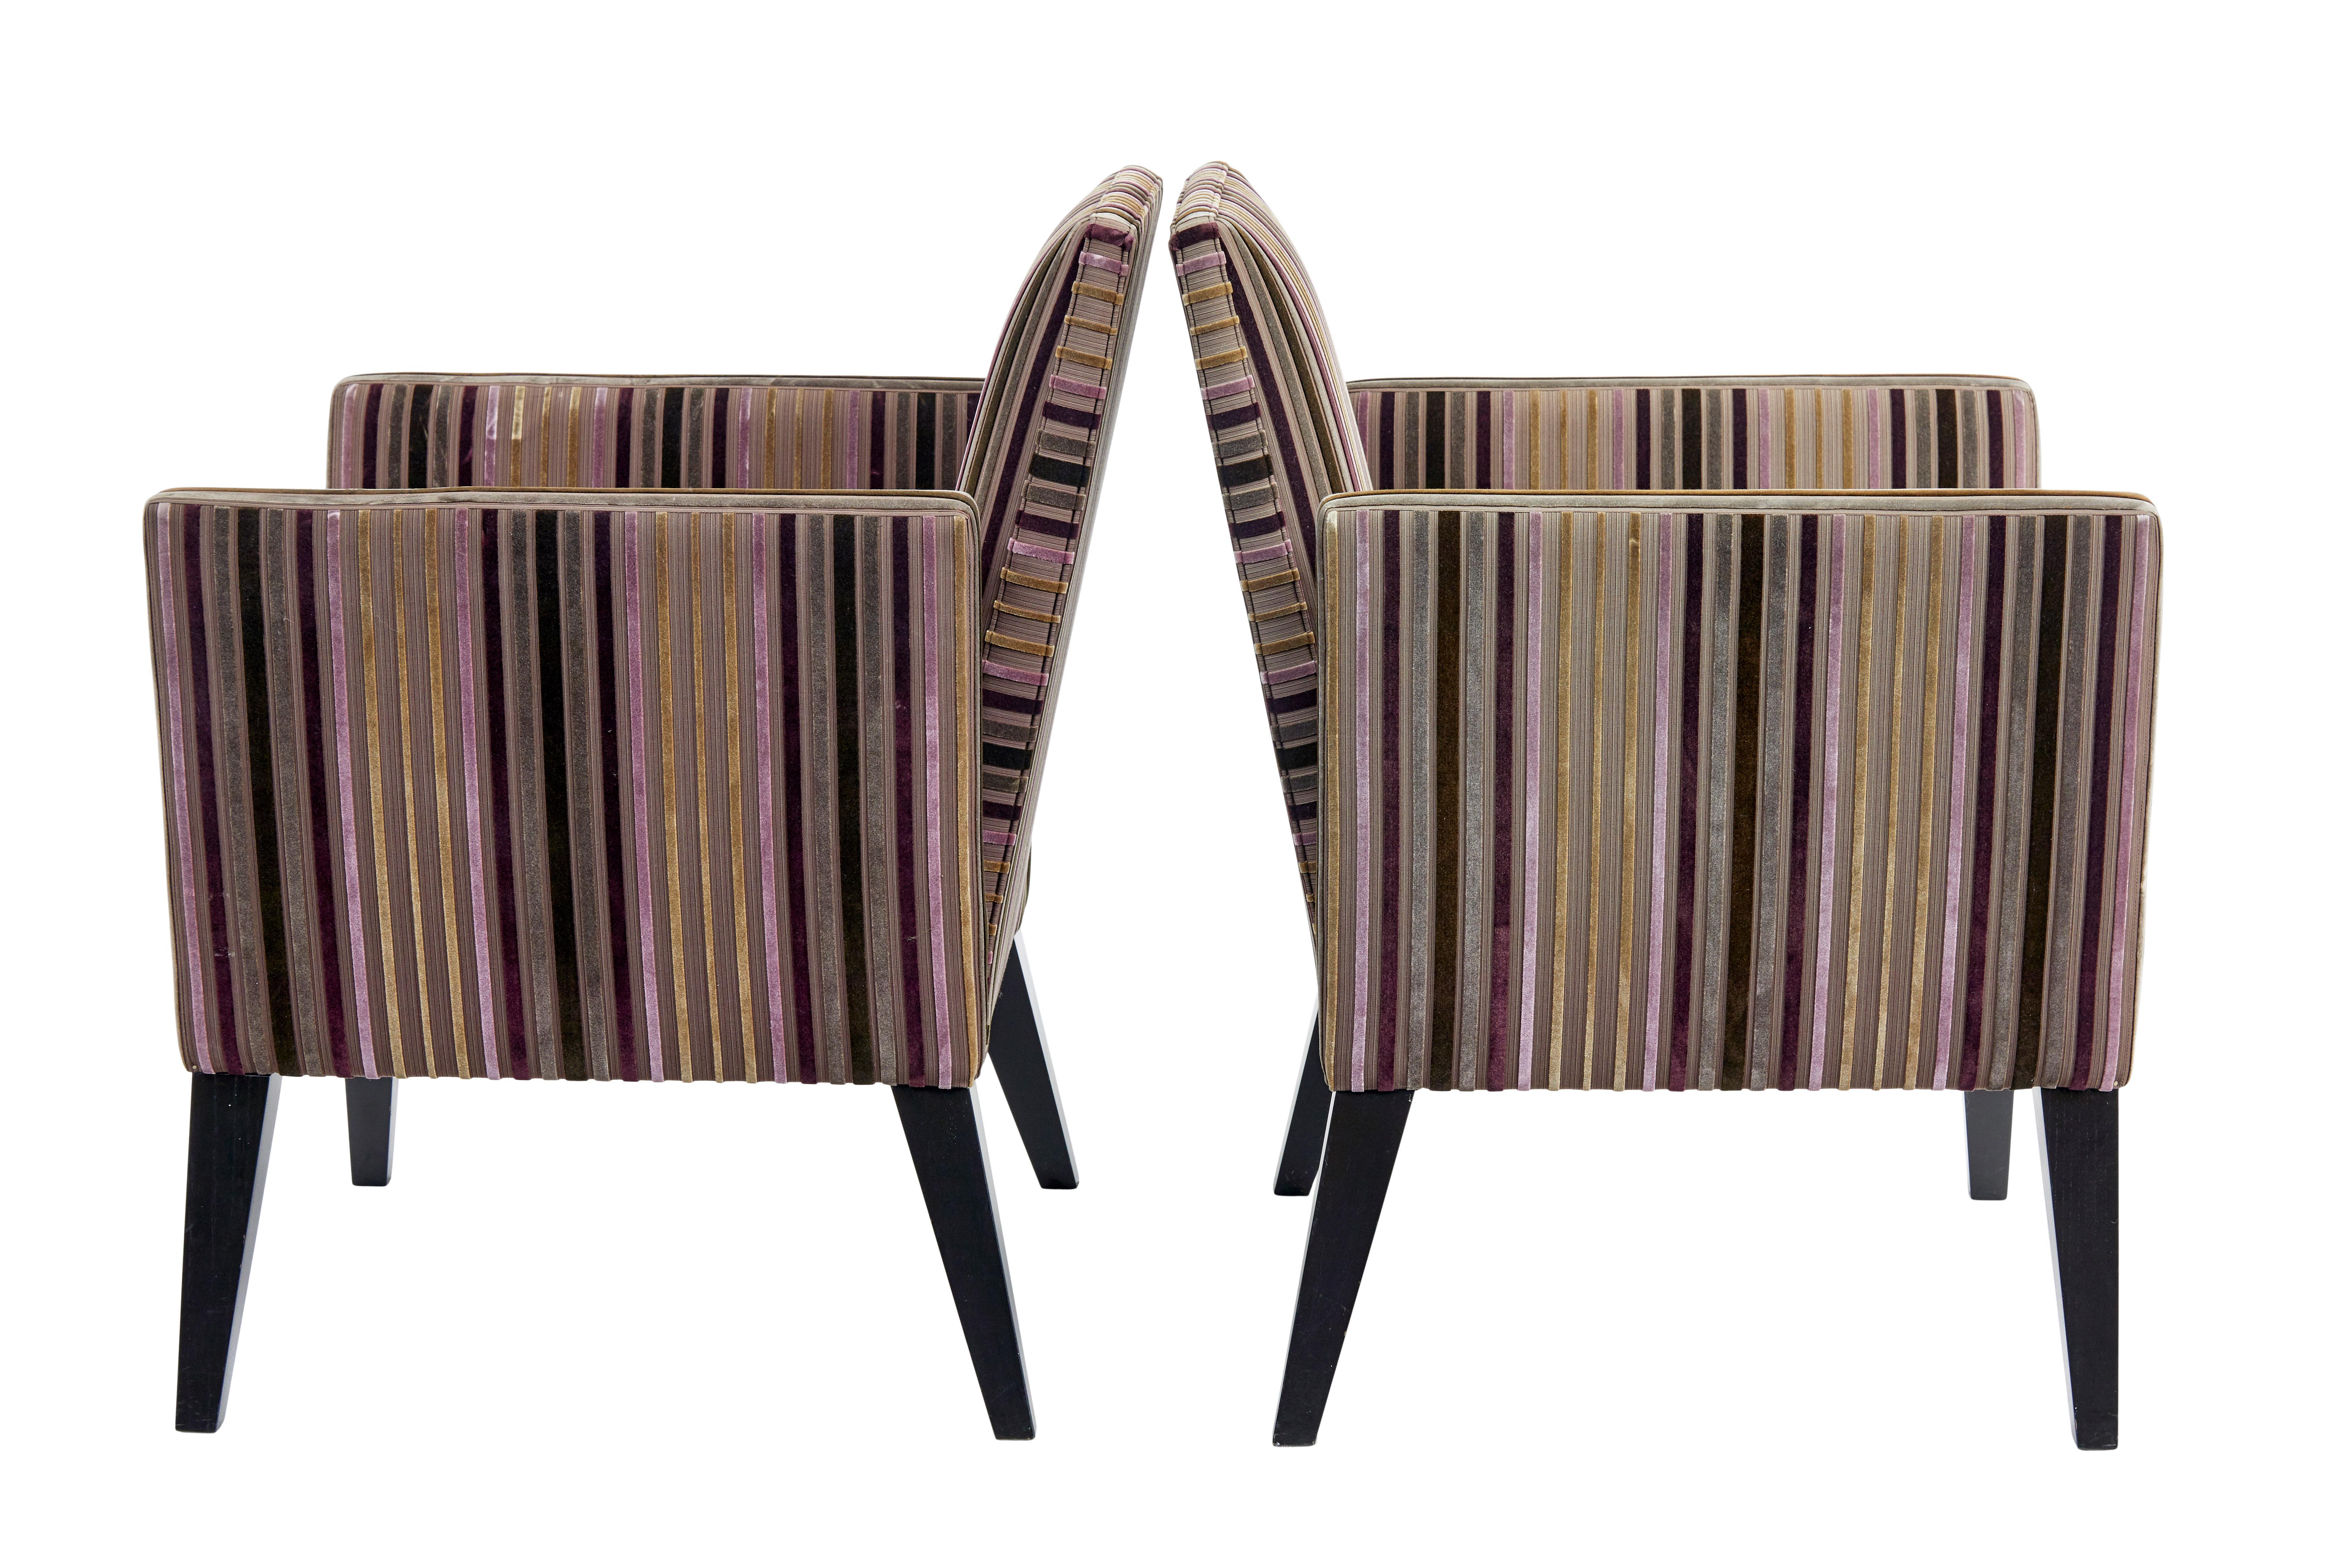 Stylish and elegant pair of contemporary armchairs.

Straight back with a fixed drop arm construction allowing  the open back design.  Standing on stained black ash tapering legs.

Some minor marks to fabric, from compression and use.

Seat height: